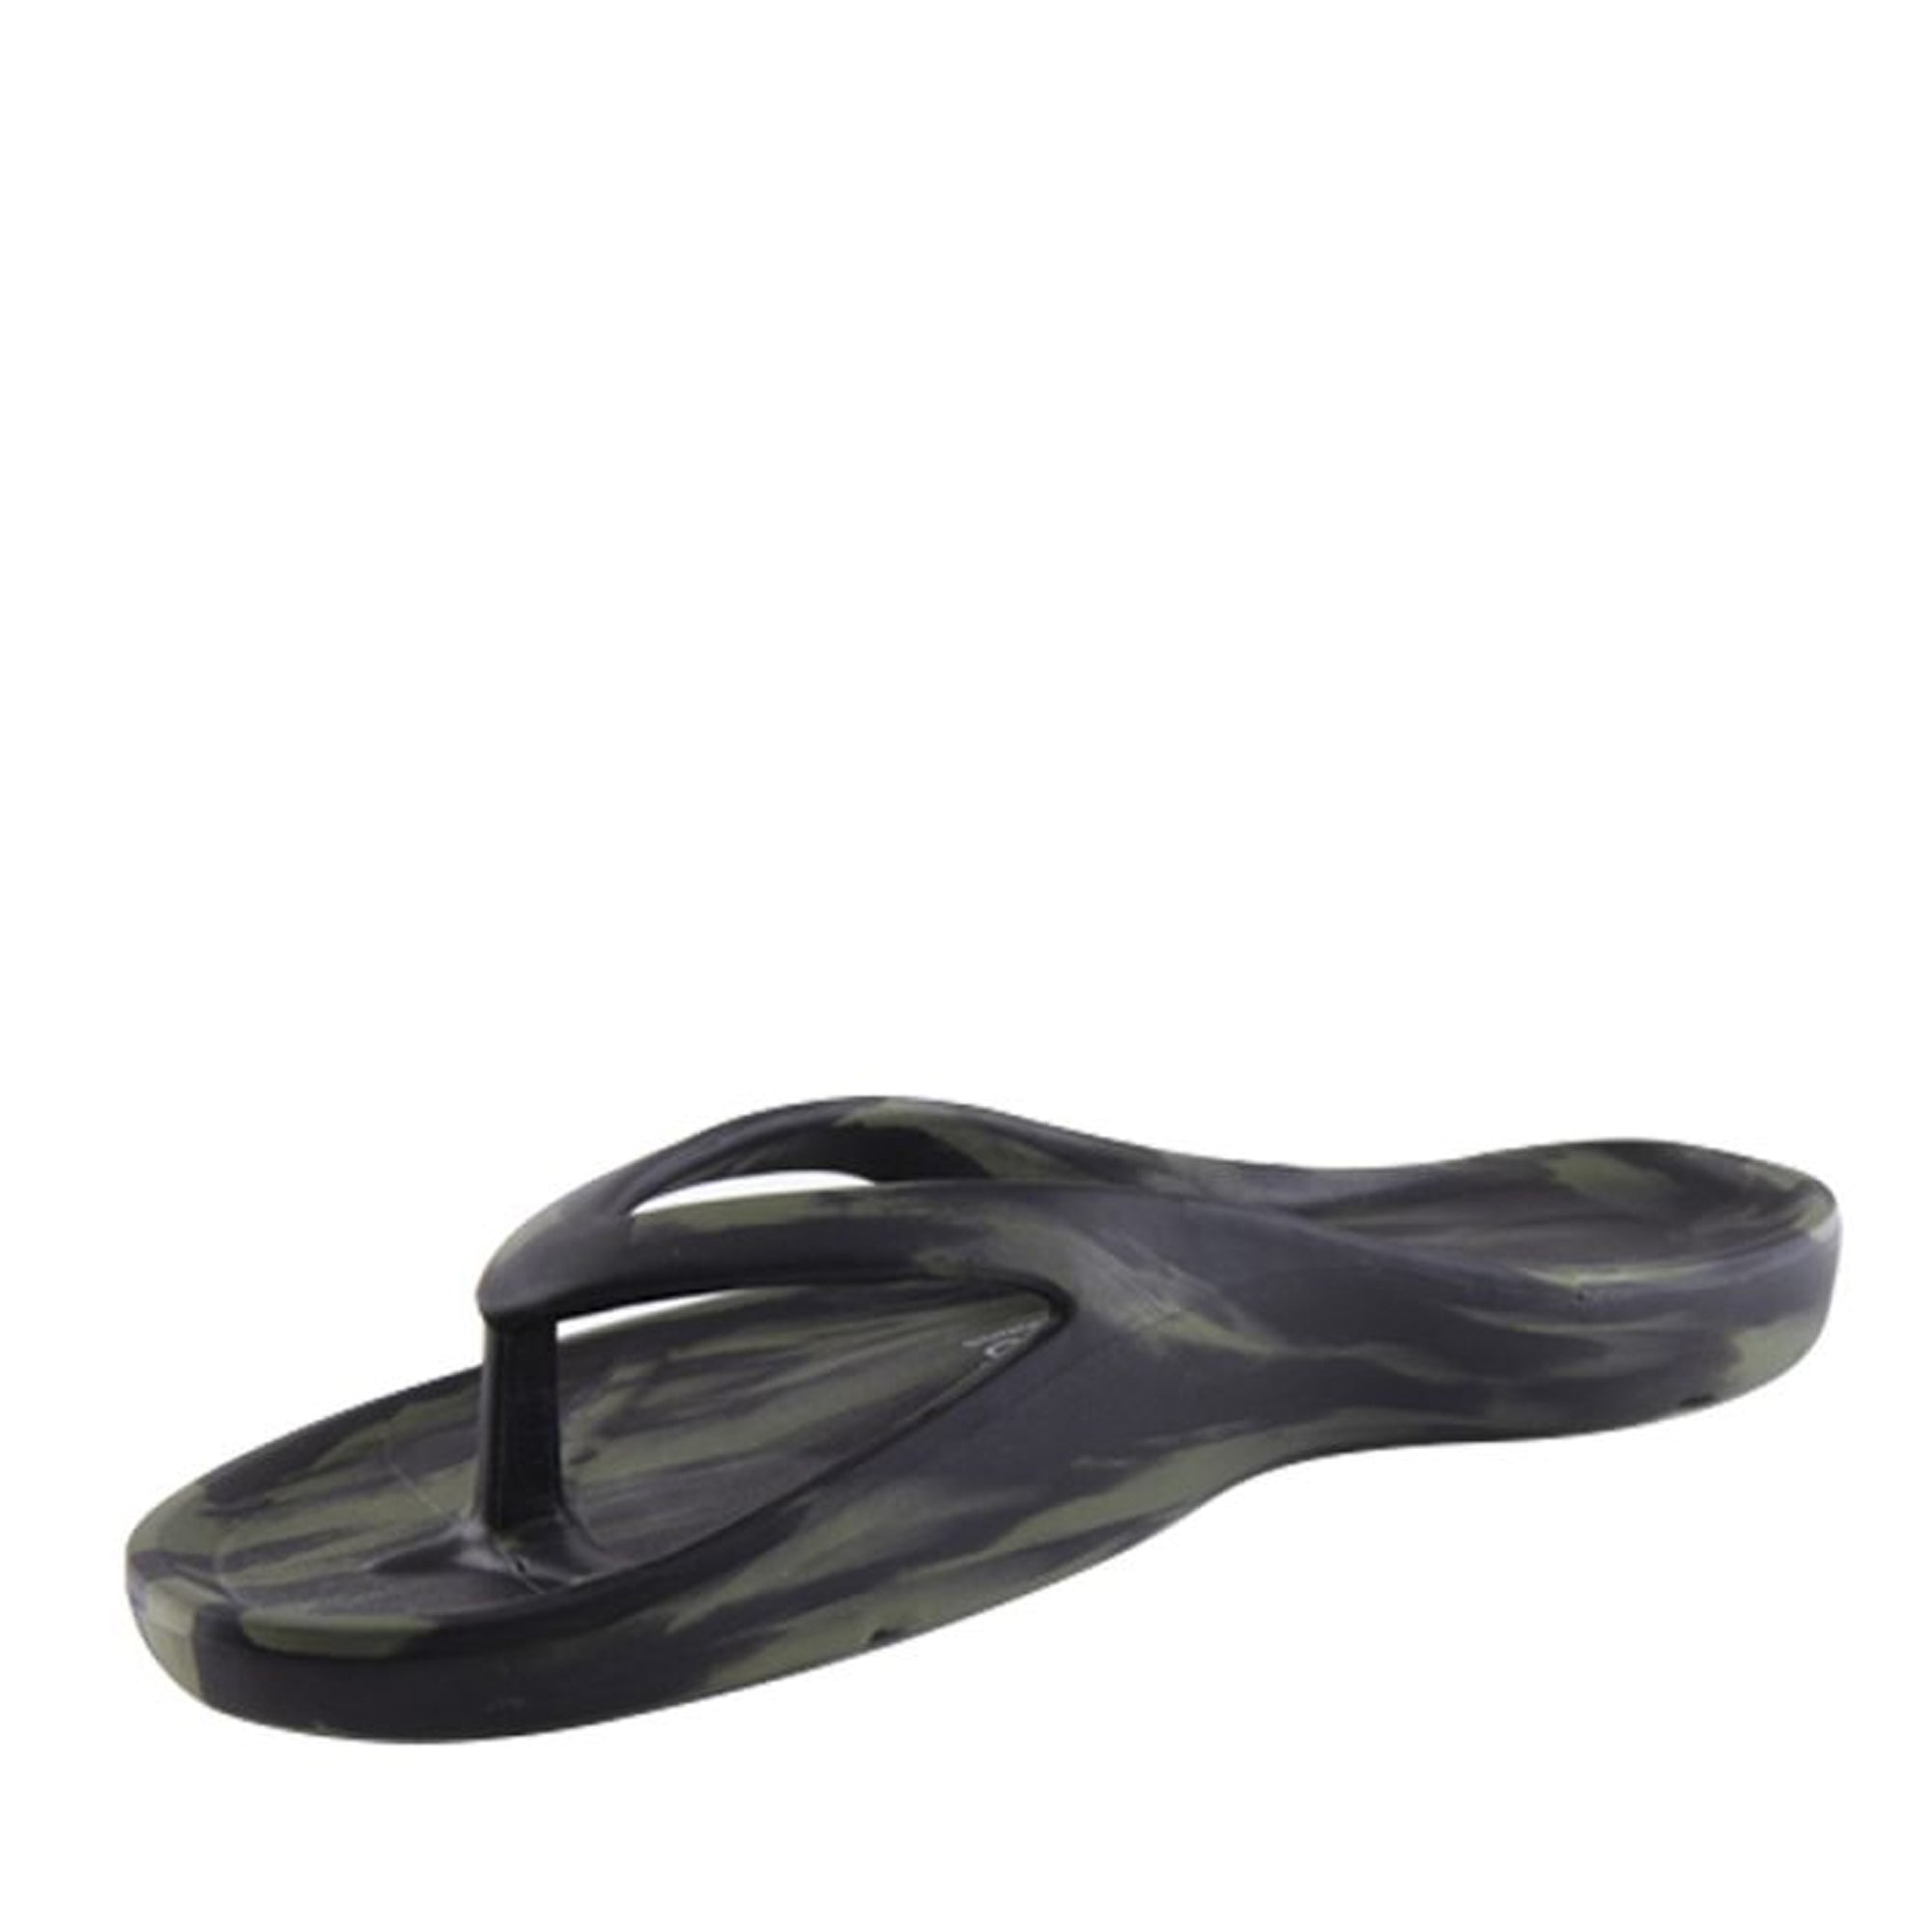 ARCH SUPPORT THONGS 2